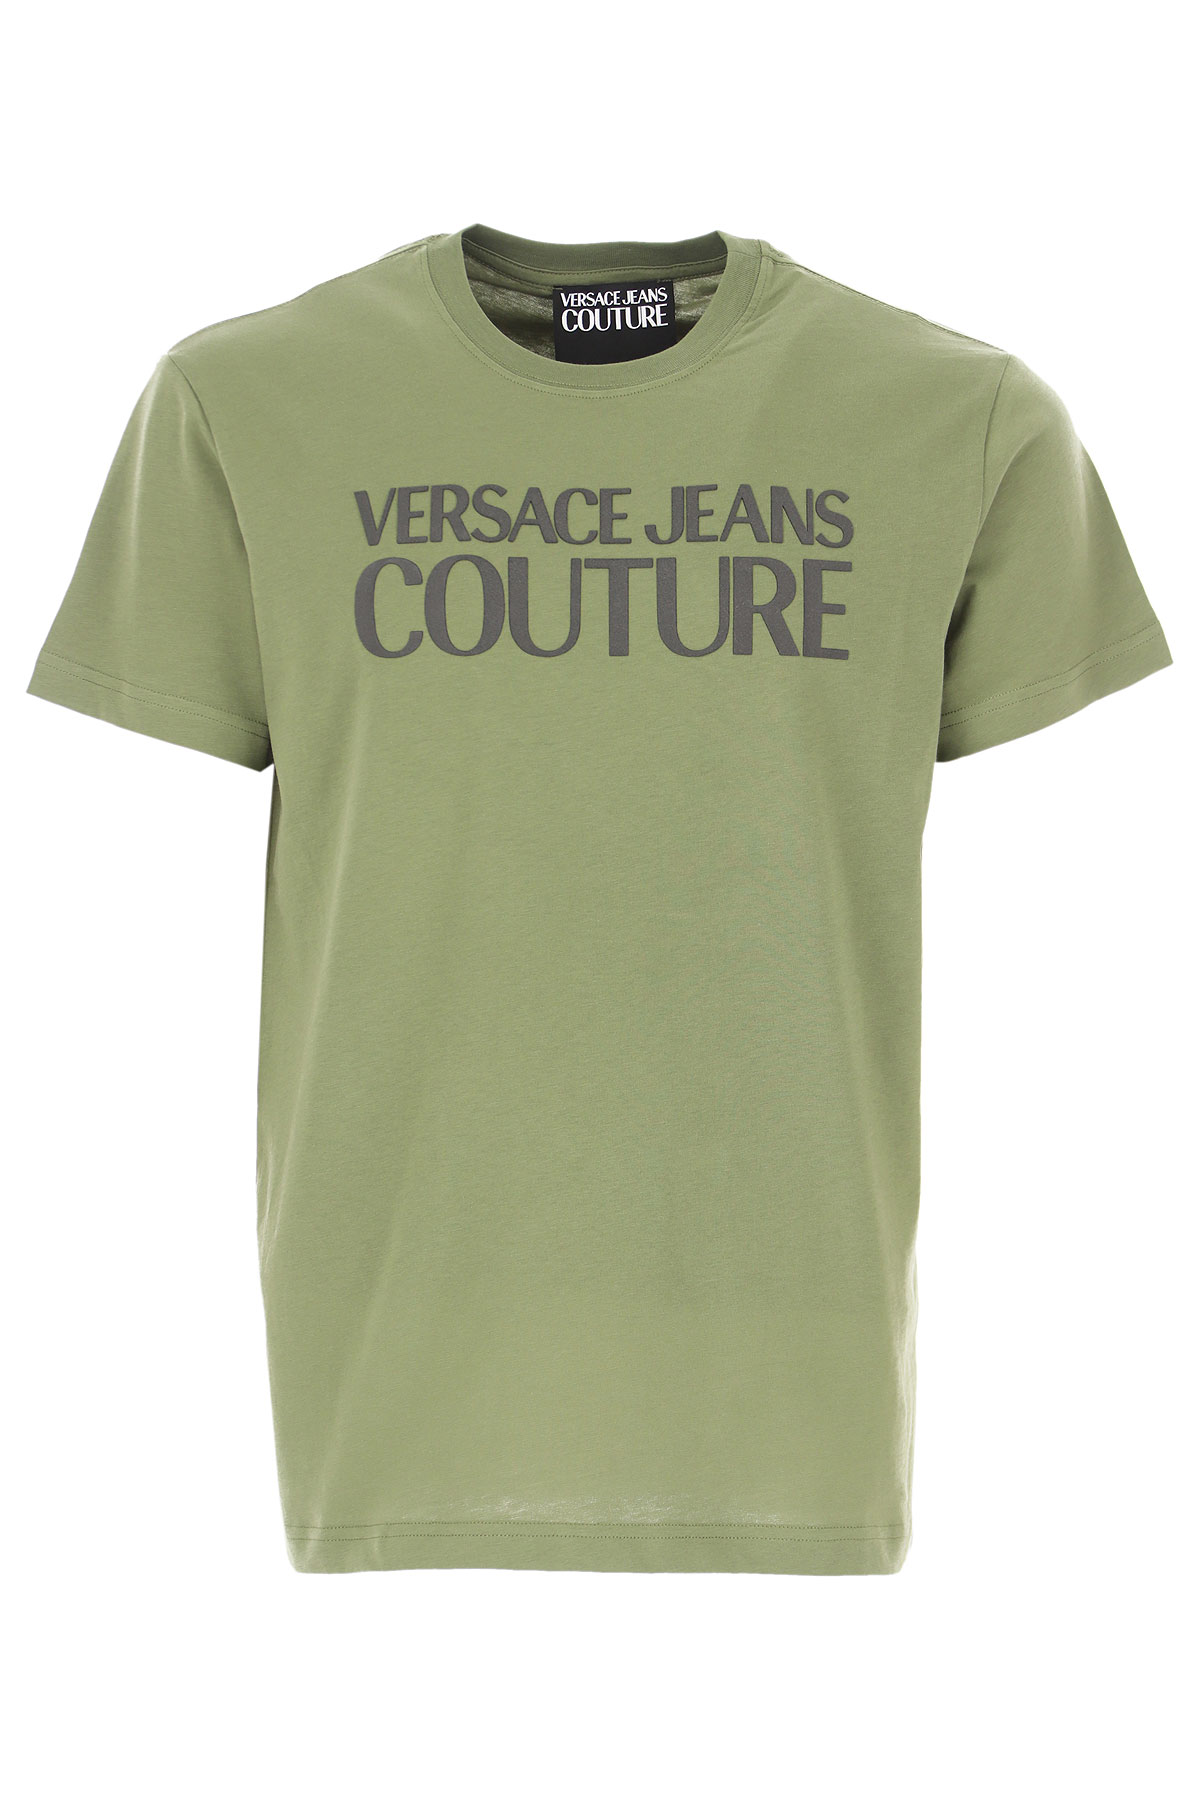 Mens Clothing Versace Jeans Couture , Style code: b3gwa7ta-30454-134